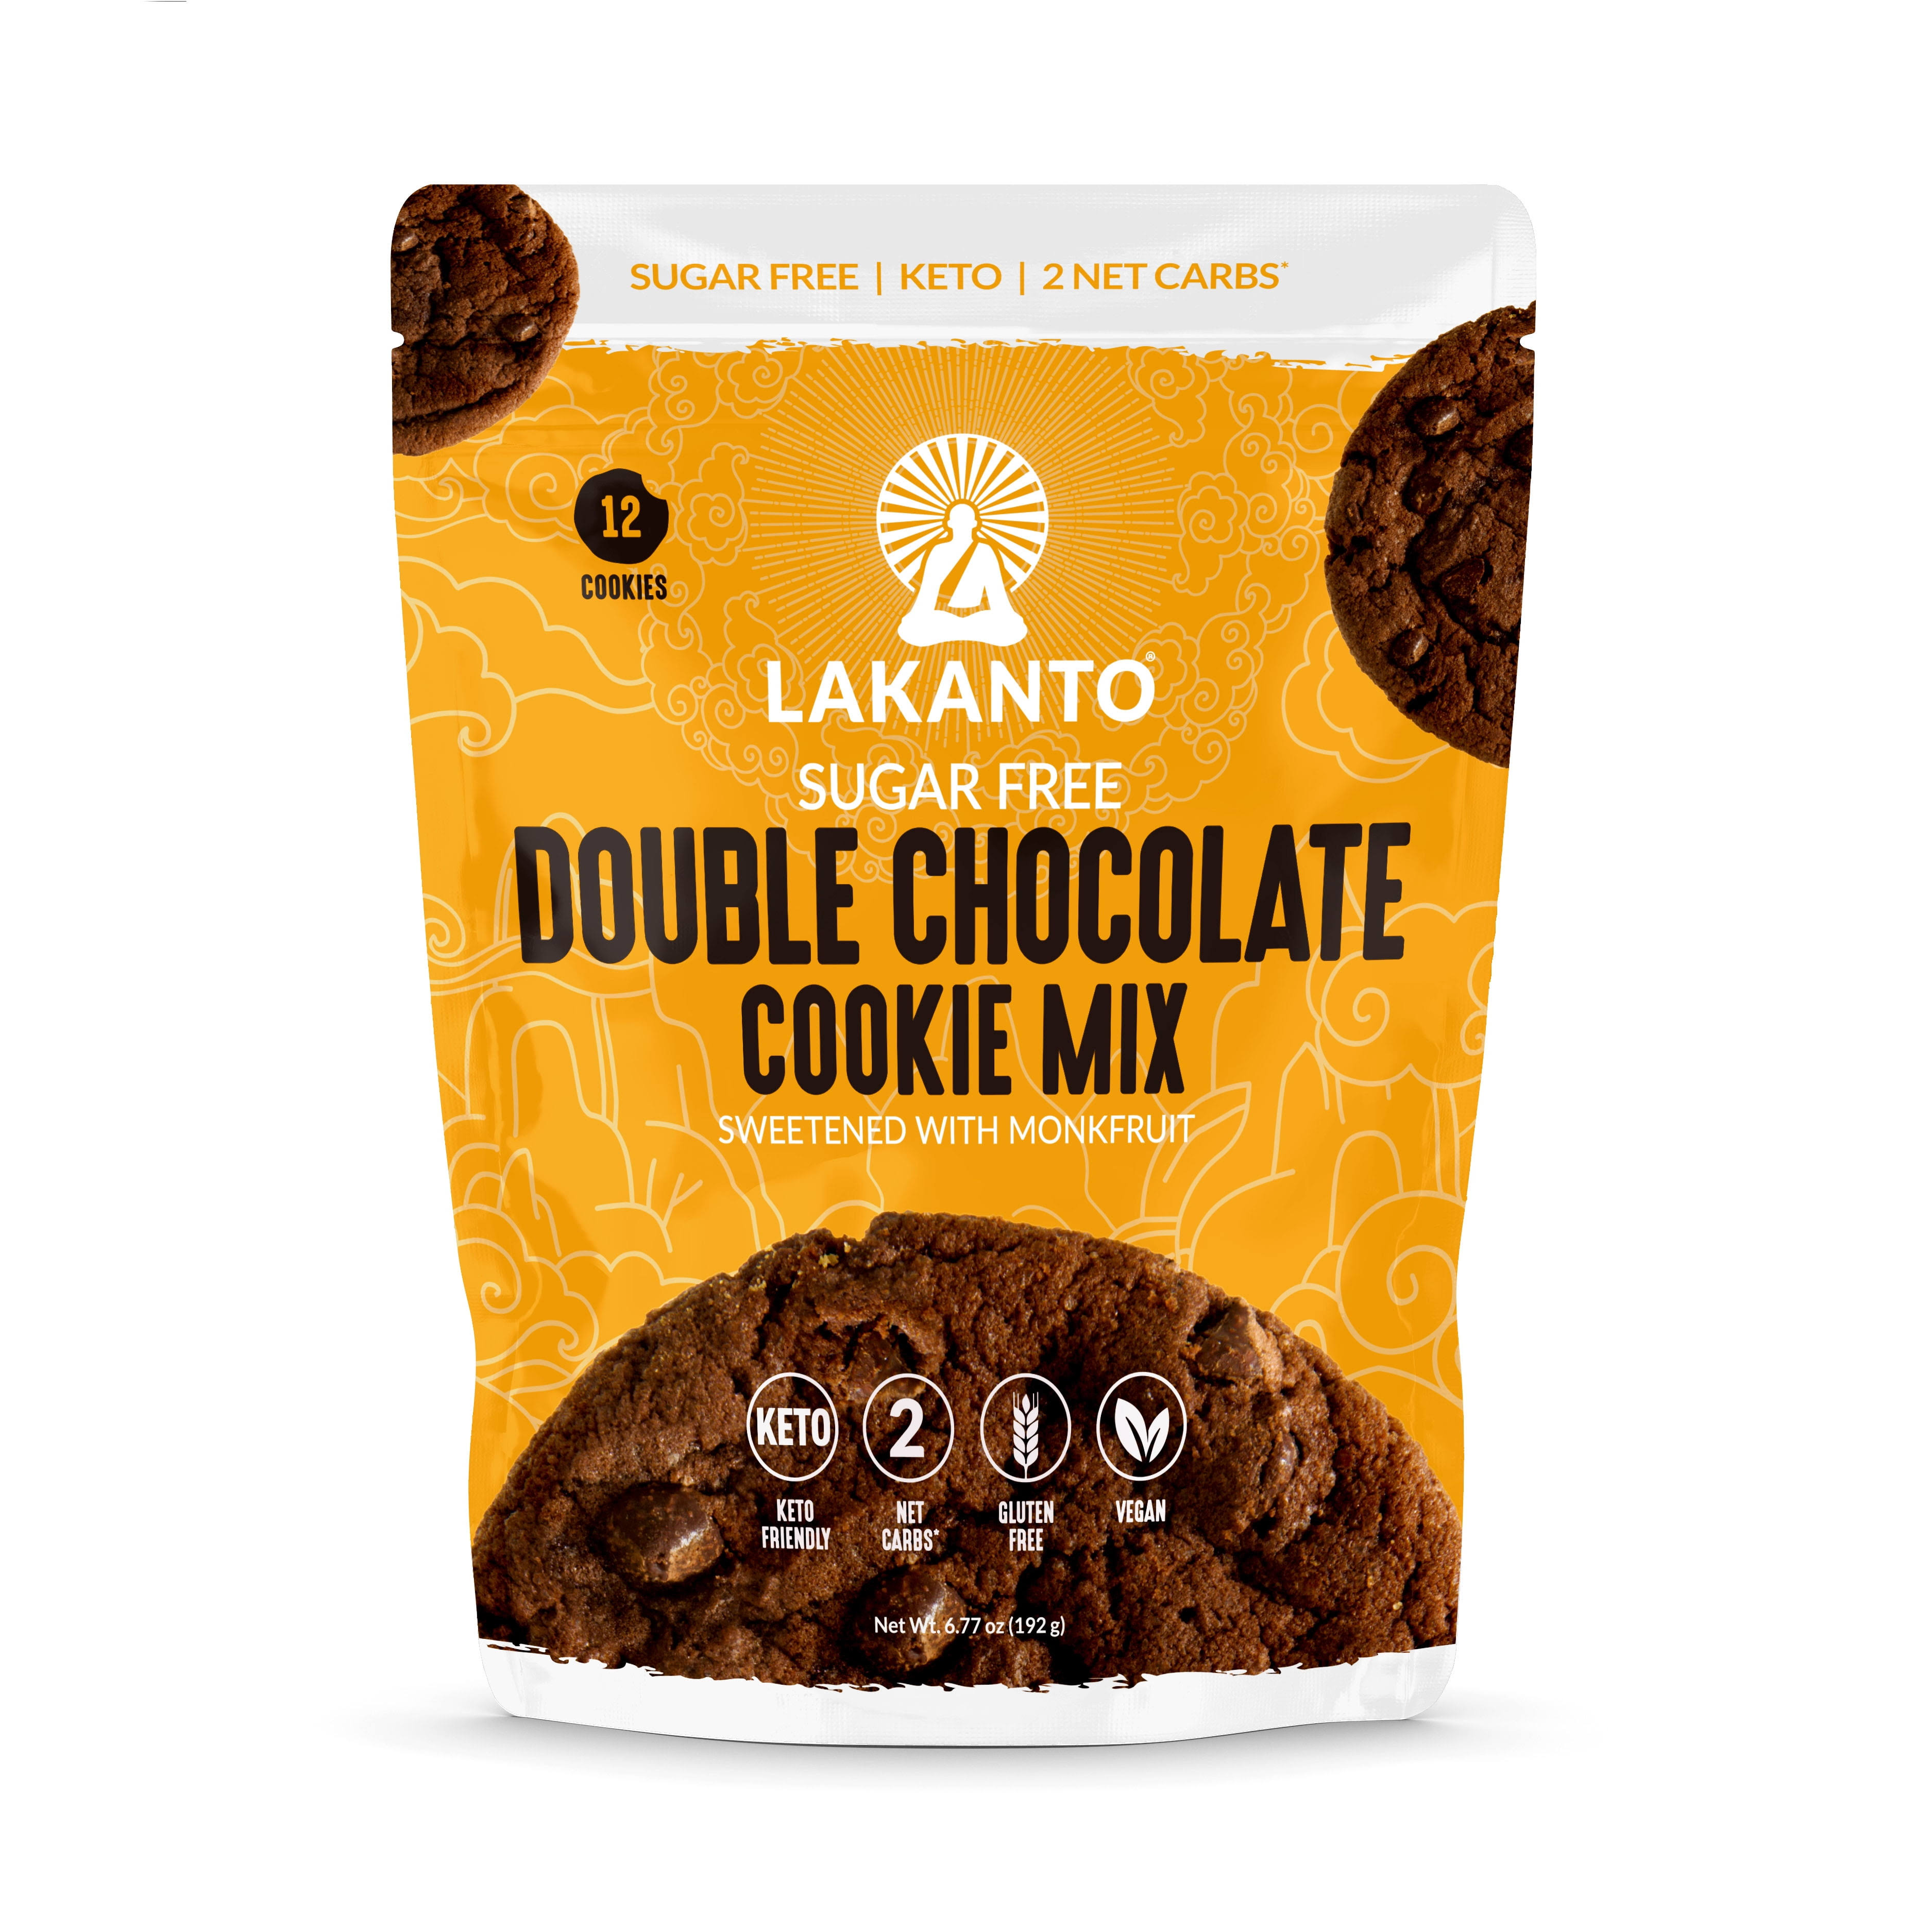 Lakanto Sugar Free Double Chocolate Cookie Mix - Sweetened with Monk F